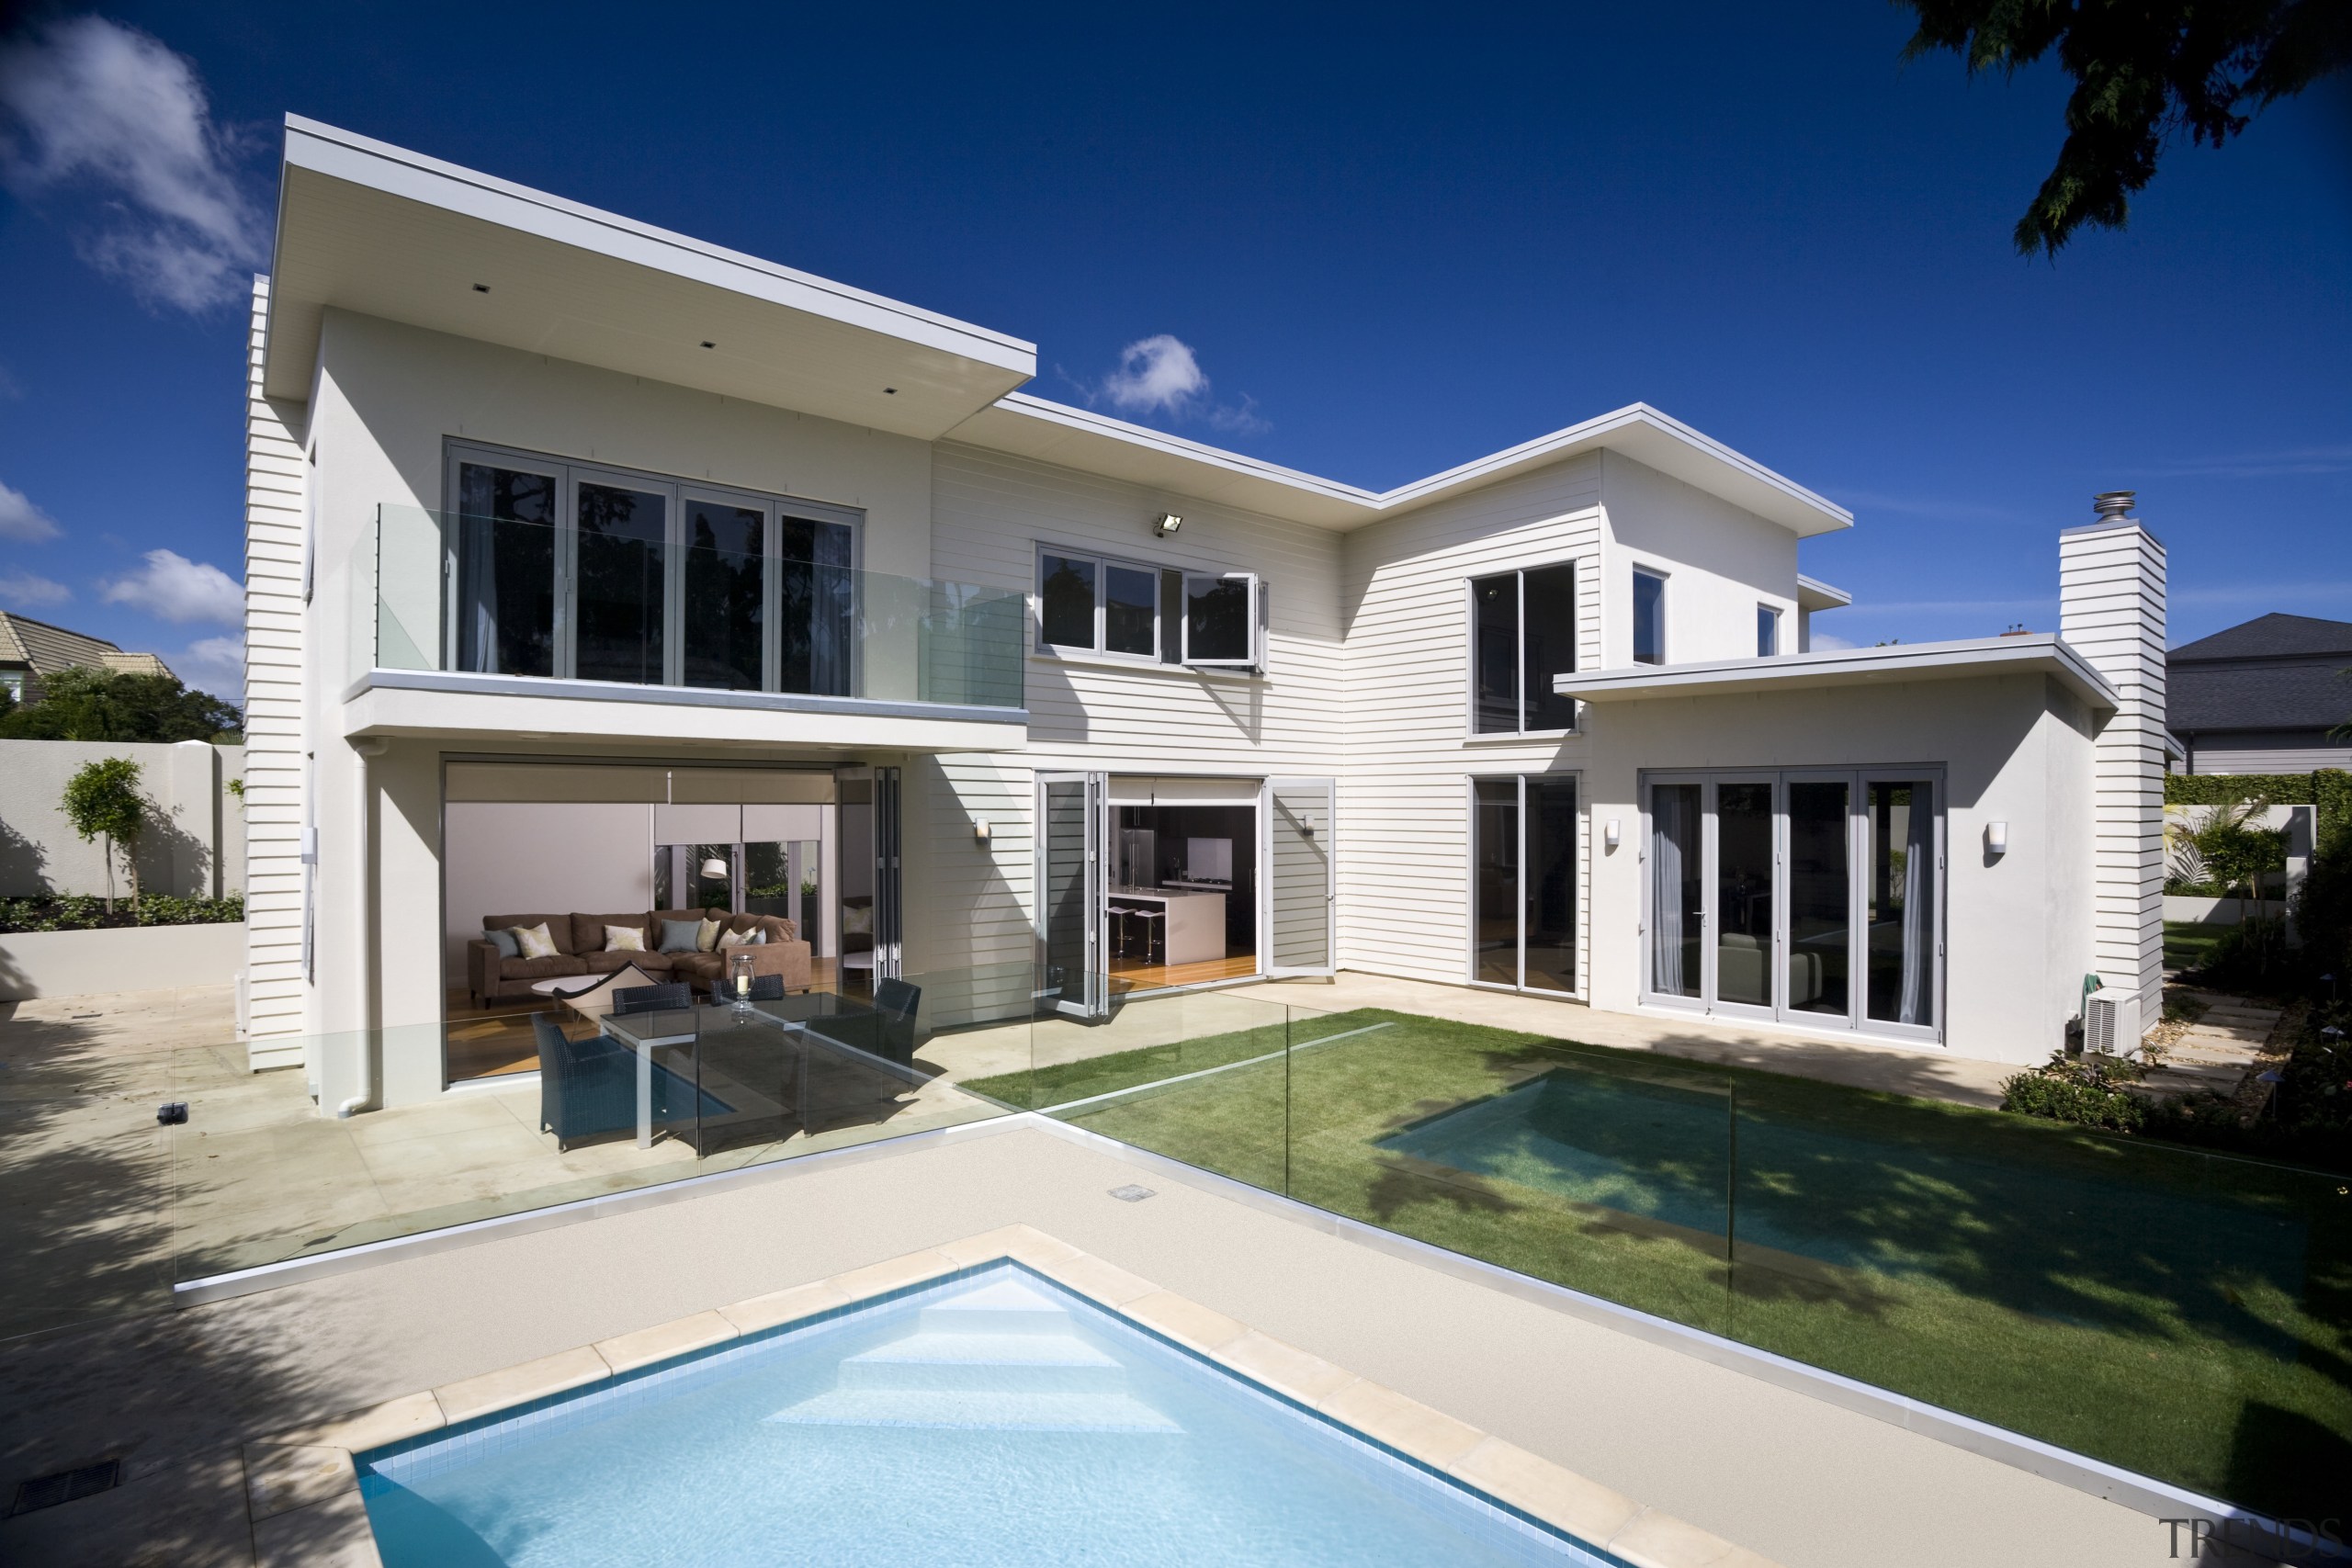 Image of the exterior home designed by Principle architecture, elevation, estate, facade, home, house, mansion, property, real estate, residential area, swimming pool, villa, window, white, blue